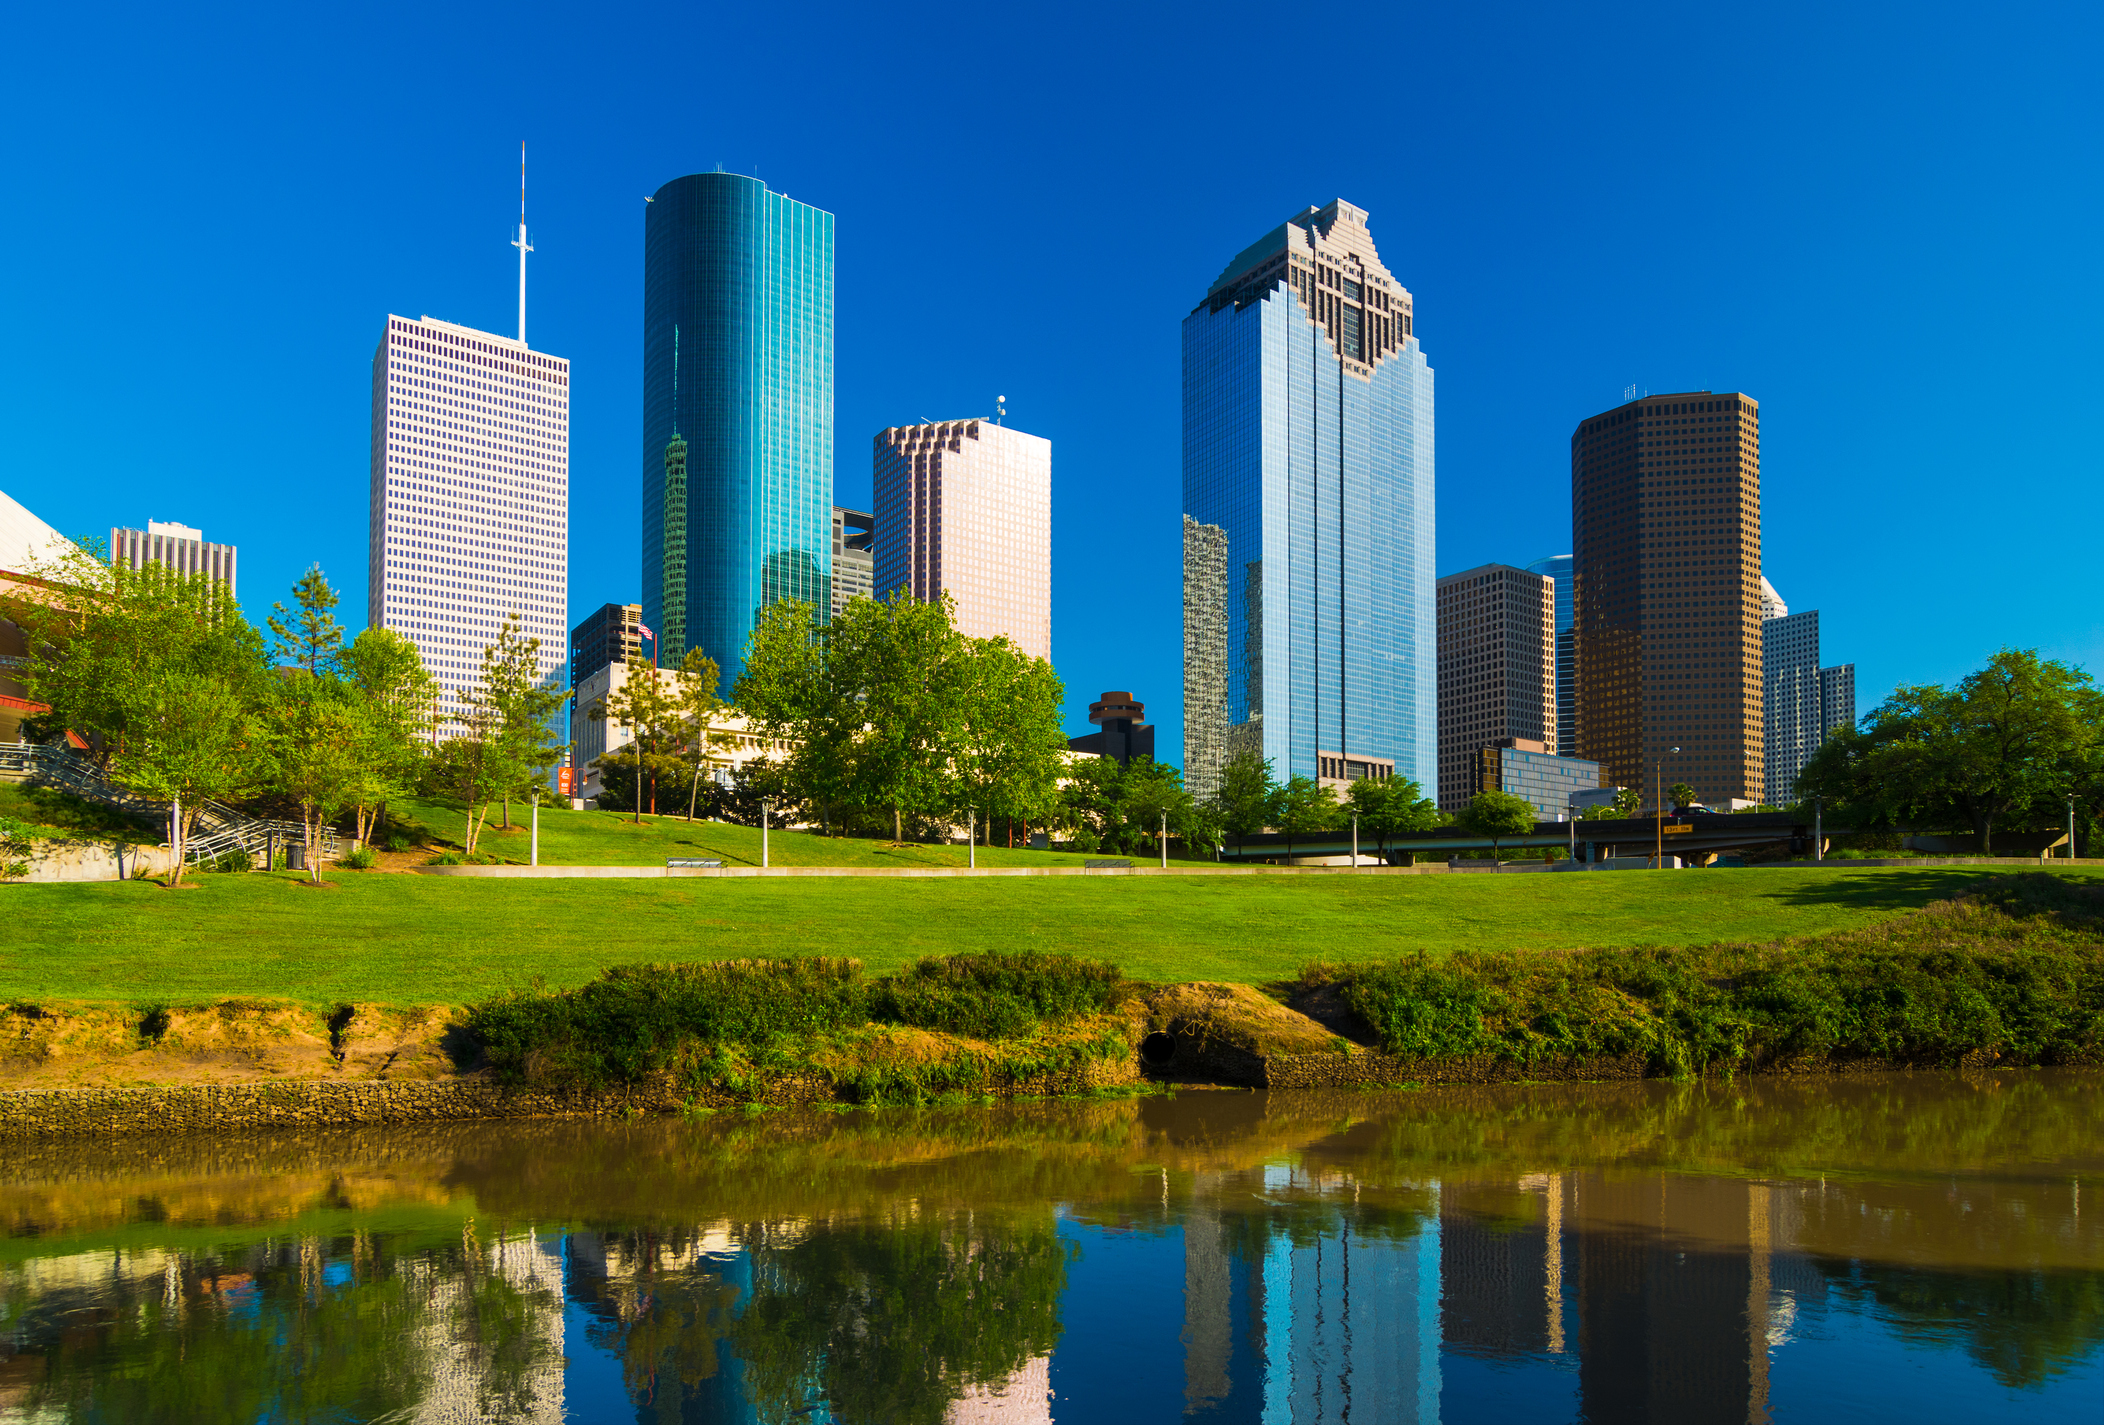 Discovering Houston: Four Activities You Might Want to Check Out